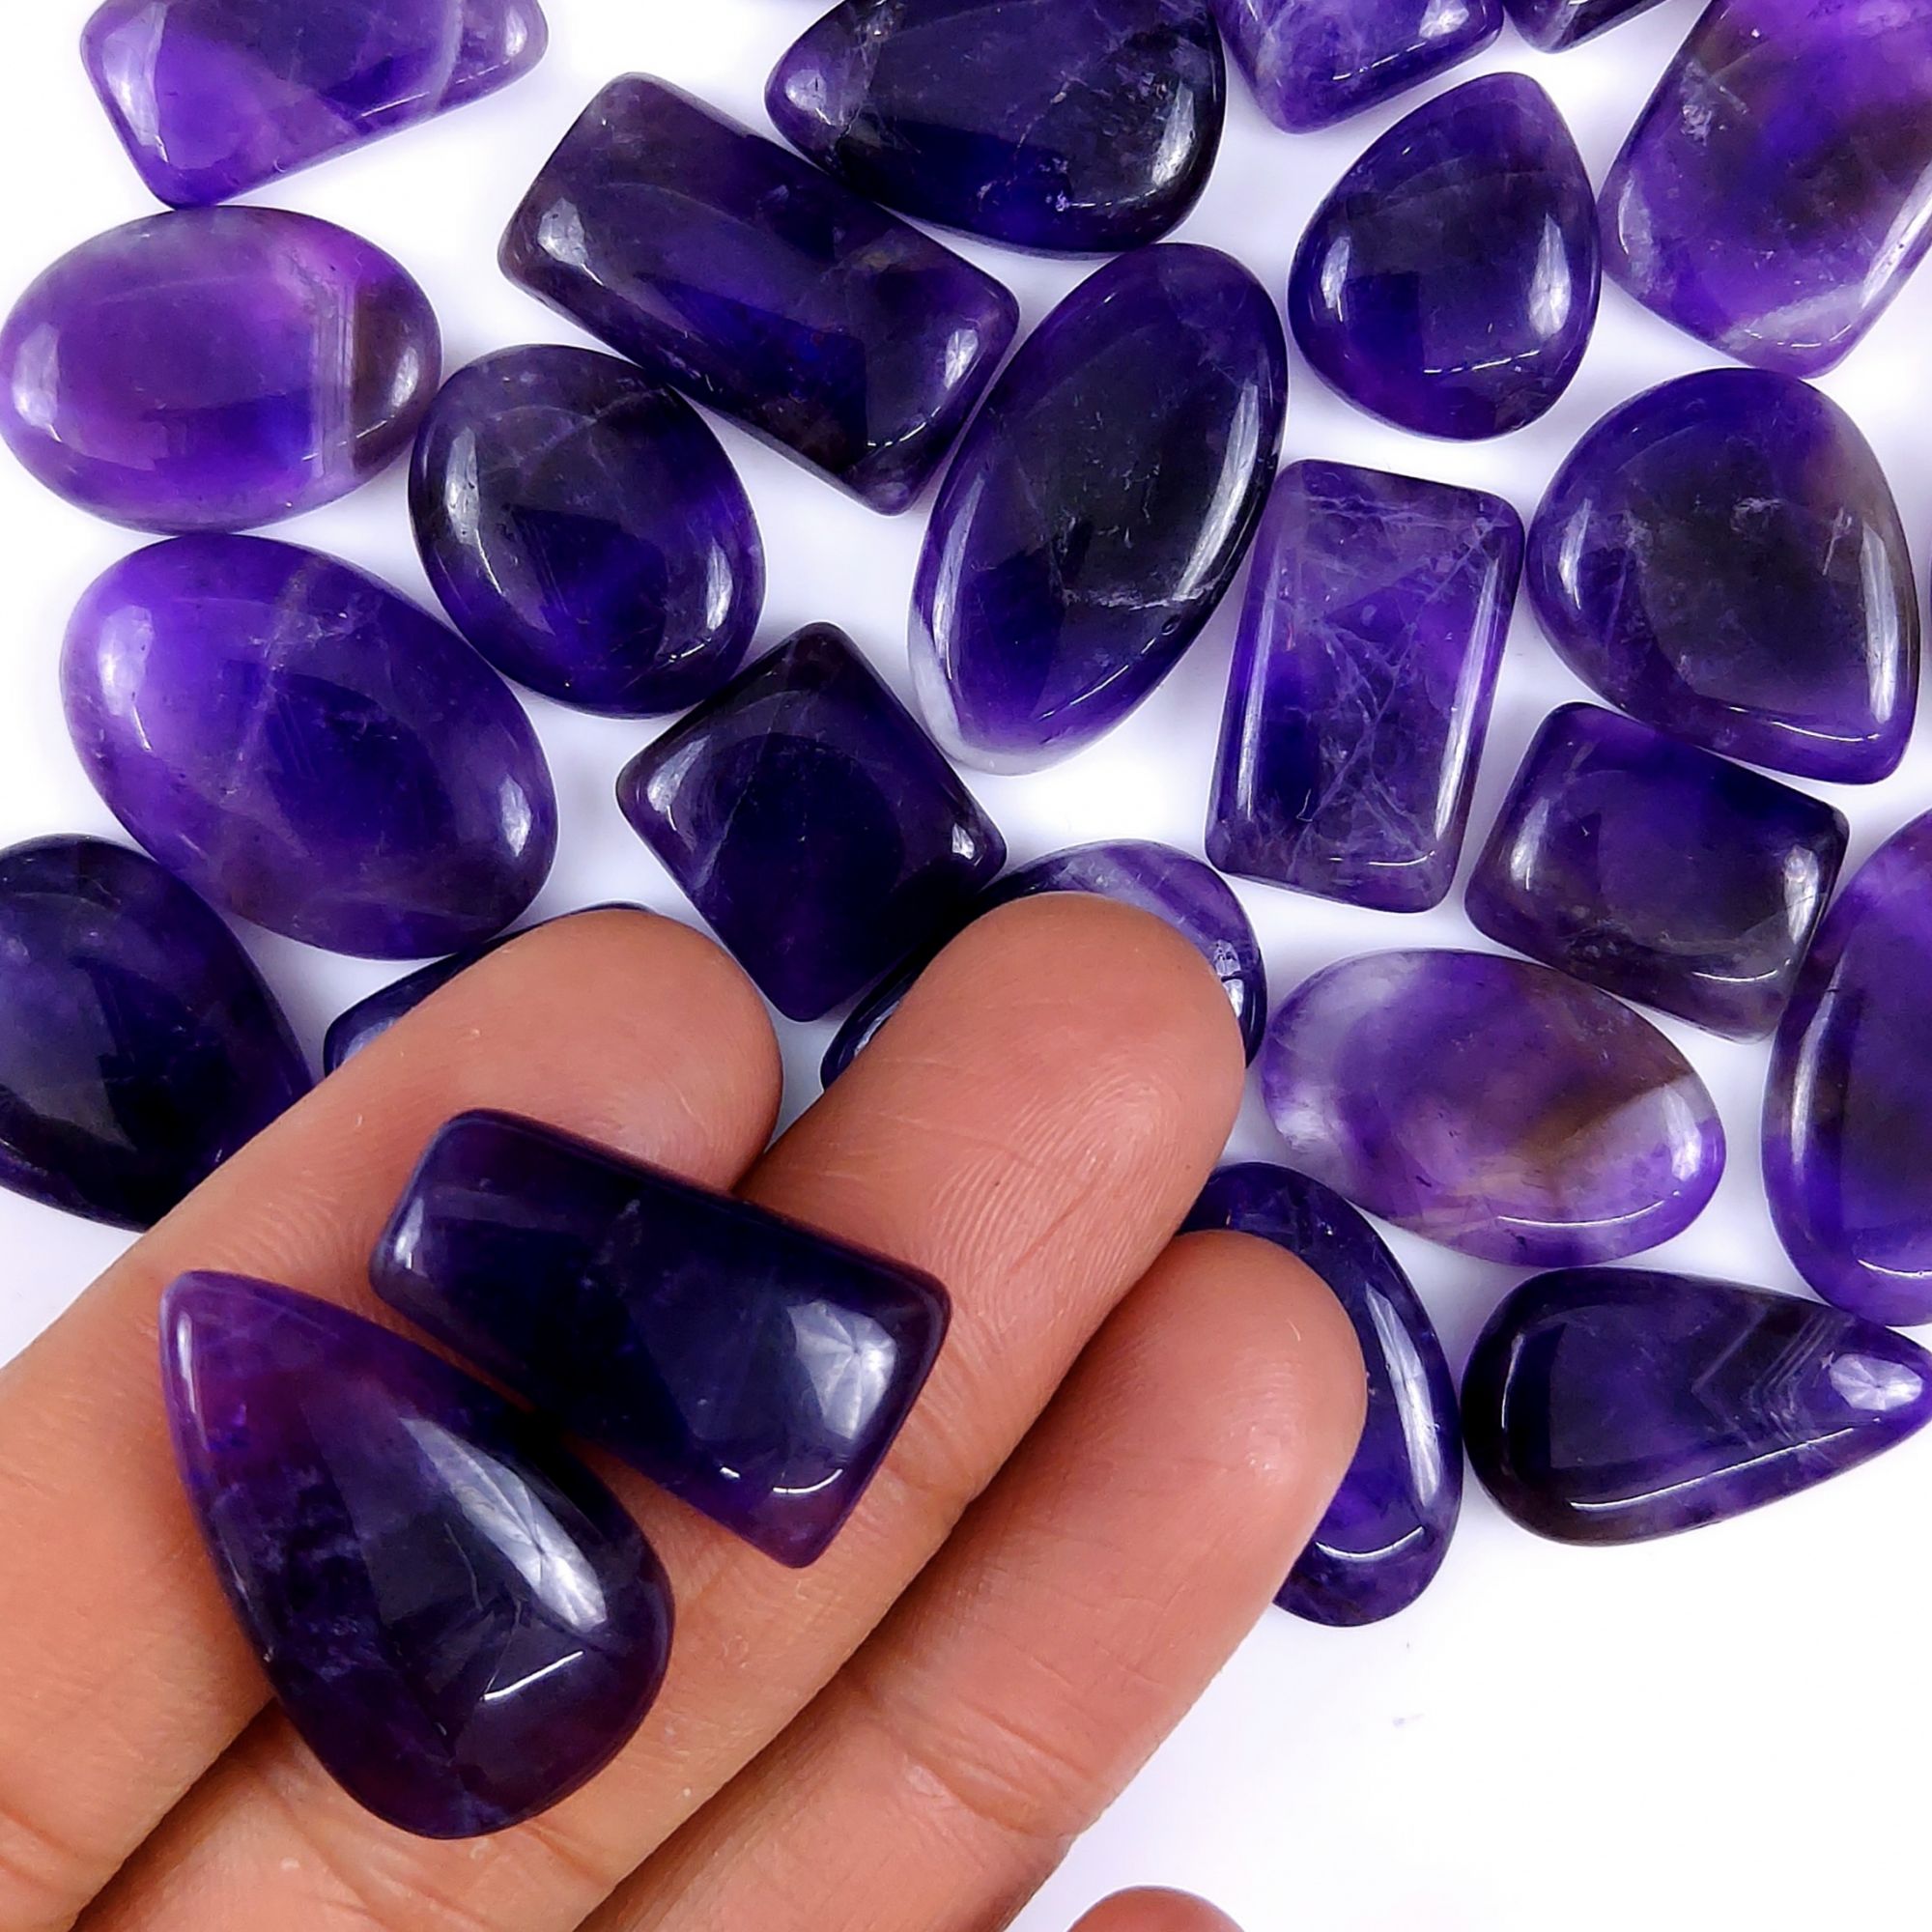 30Pcs 526Cts Natural Amethyst Cabochon lot Gemstone Purple Crystal Mix Shape Loose Gemstone beads for jewelry Making 32z18 18x14mm #7507